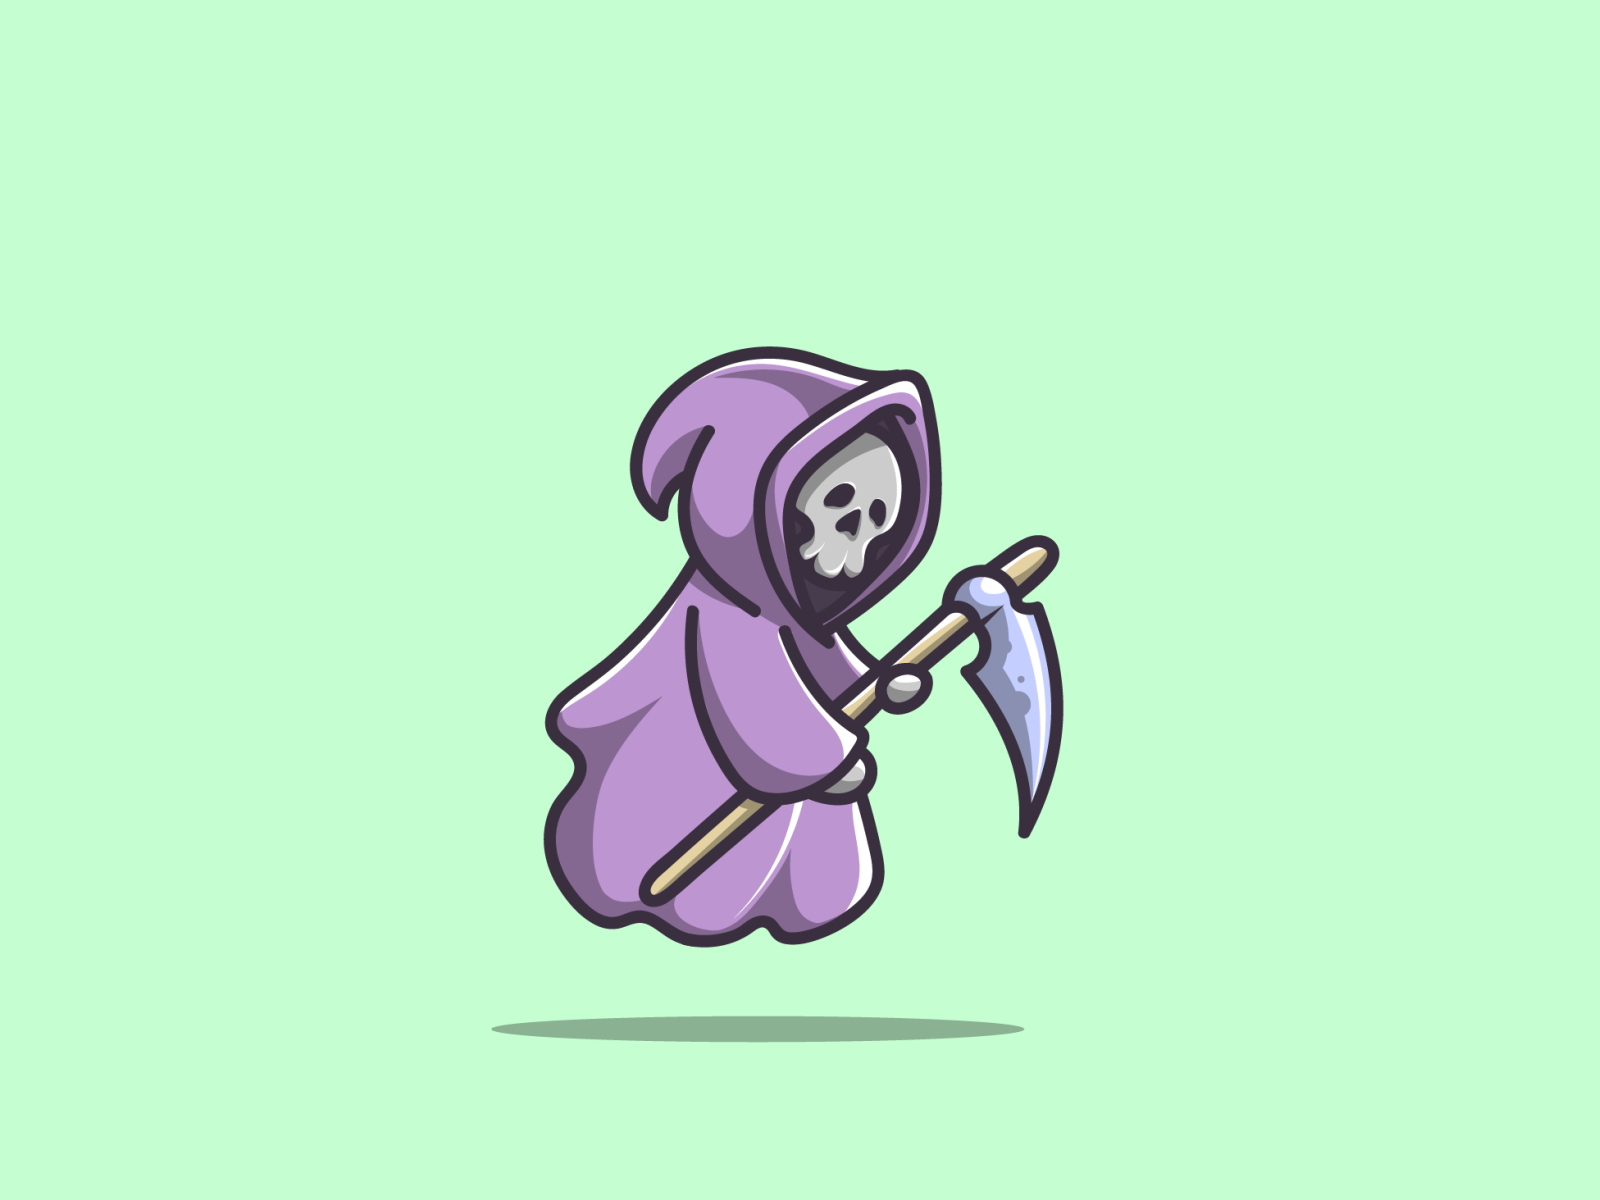 grim reaper halloween by dipo graphic on Dribbble